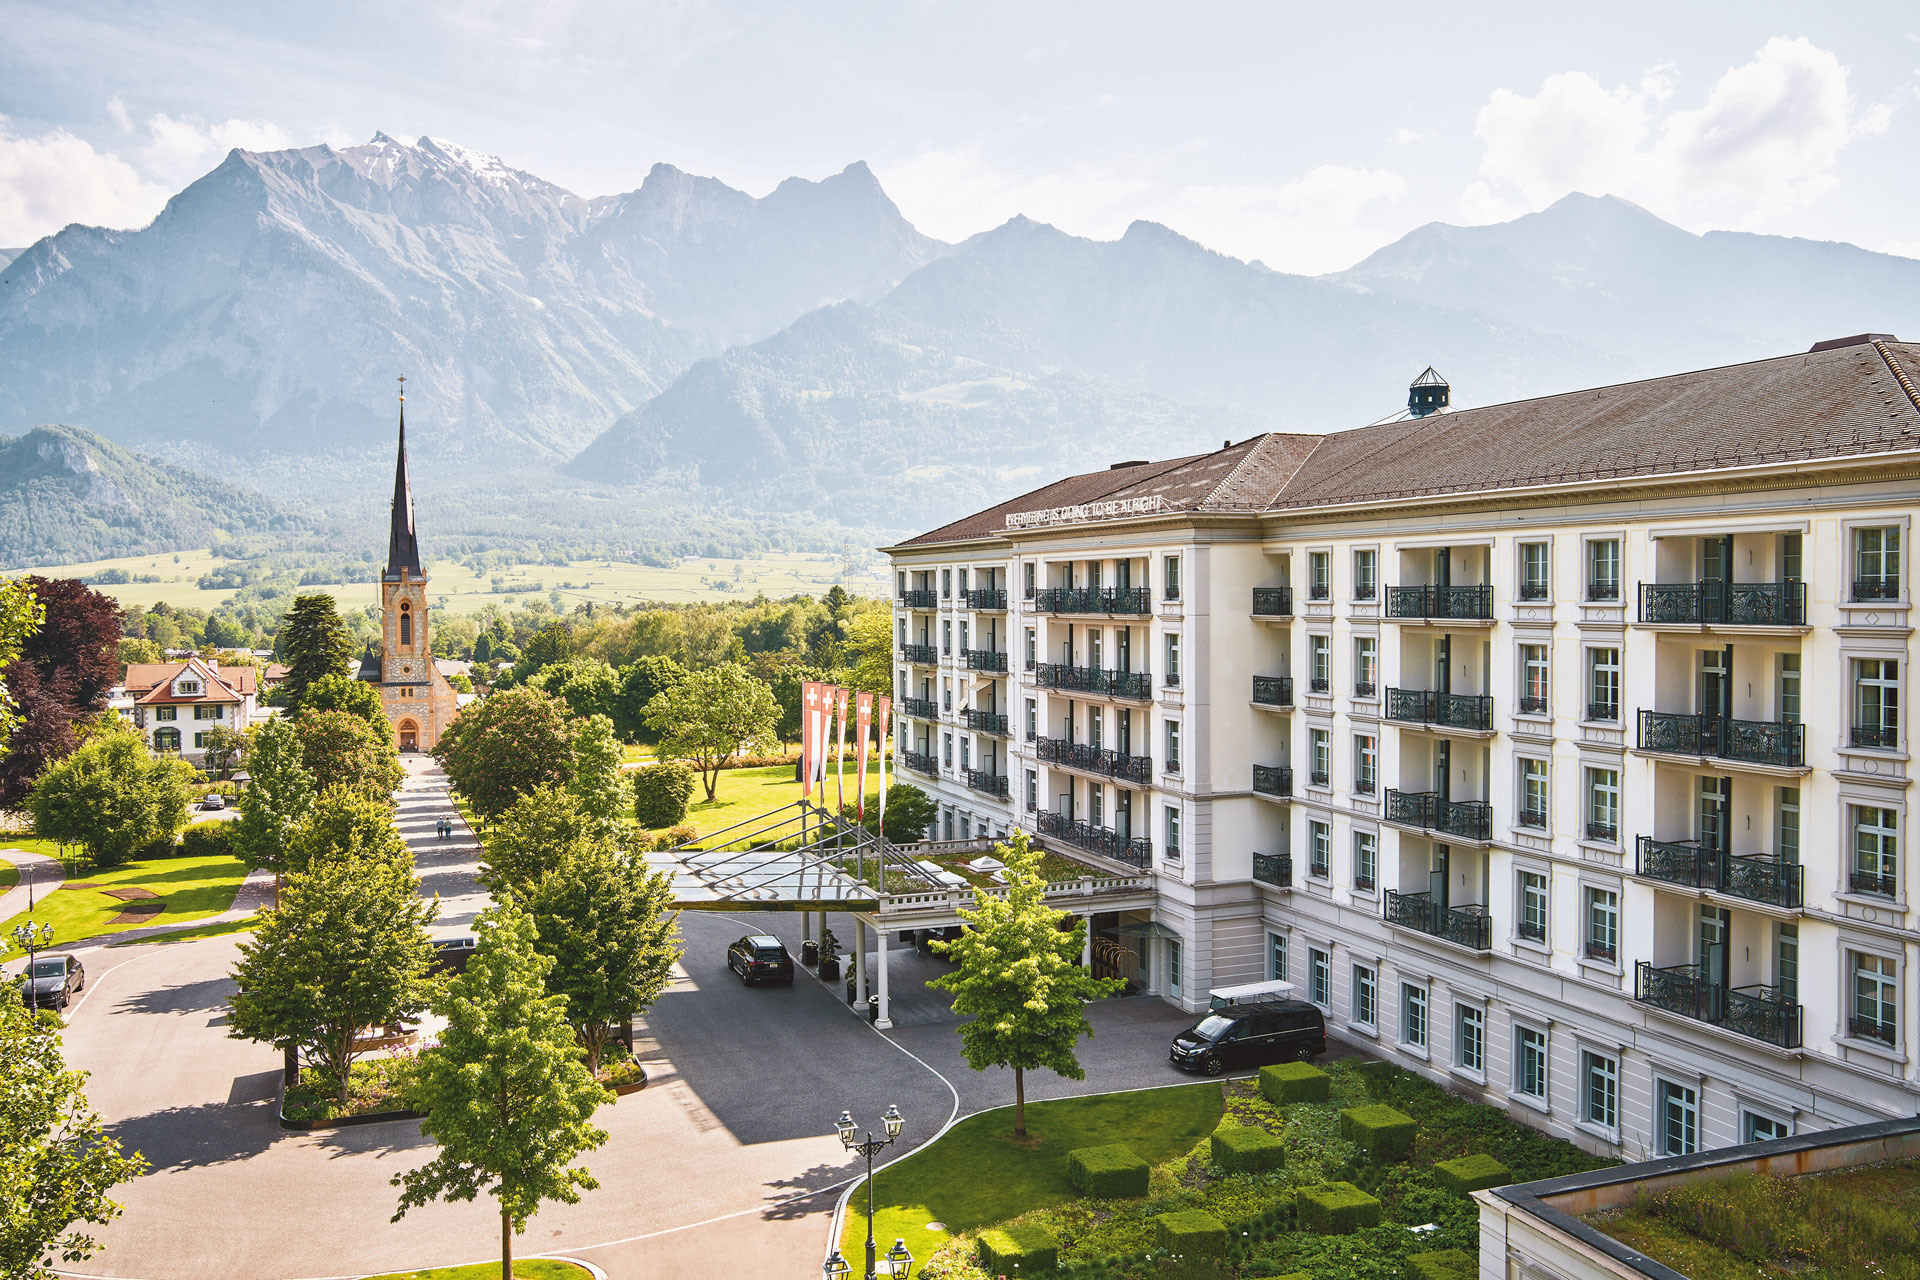 View of Grand Resort Bad Ragaz with a view of the Swiss mountains.